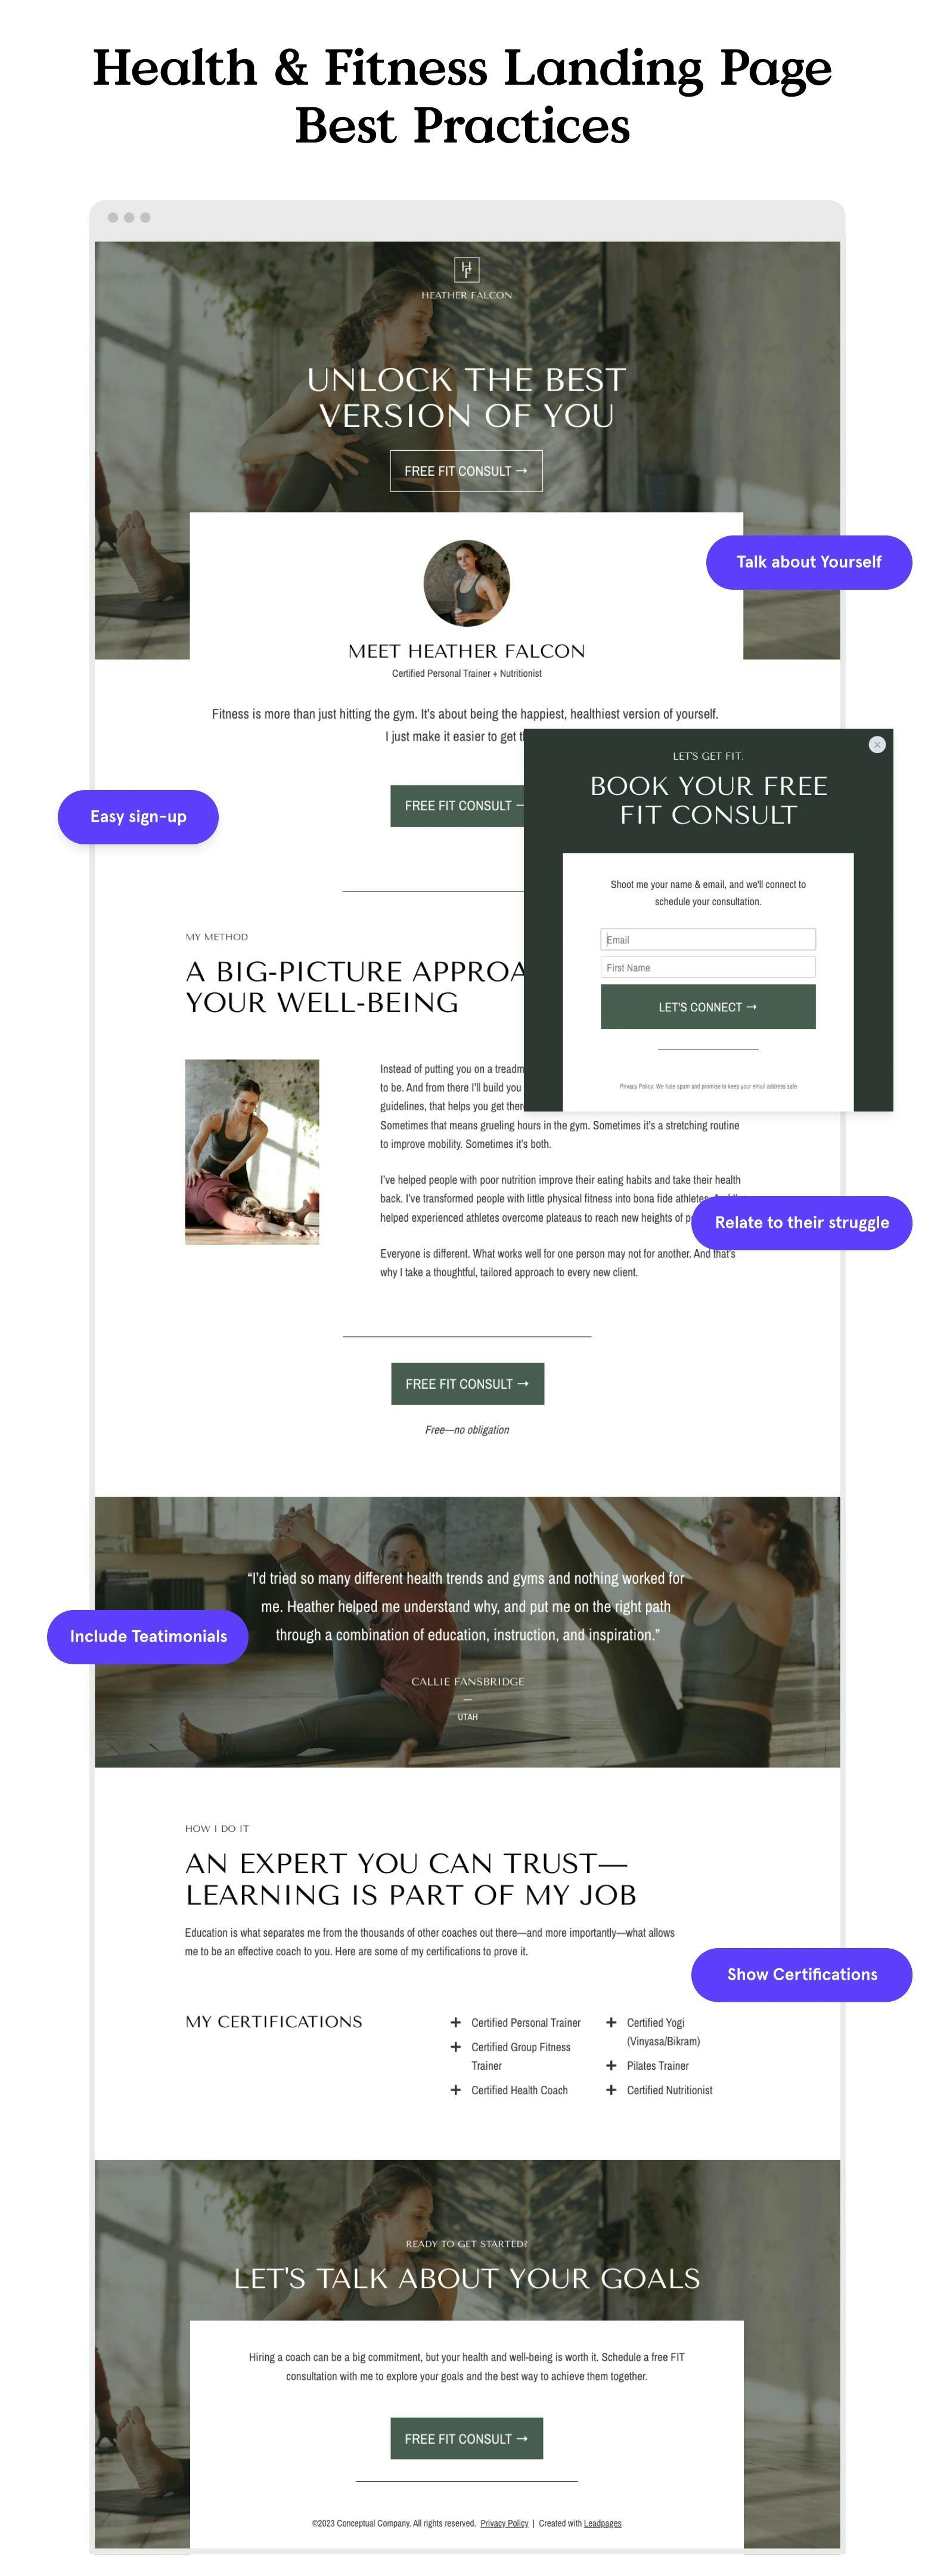 Fitness landing page best practices